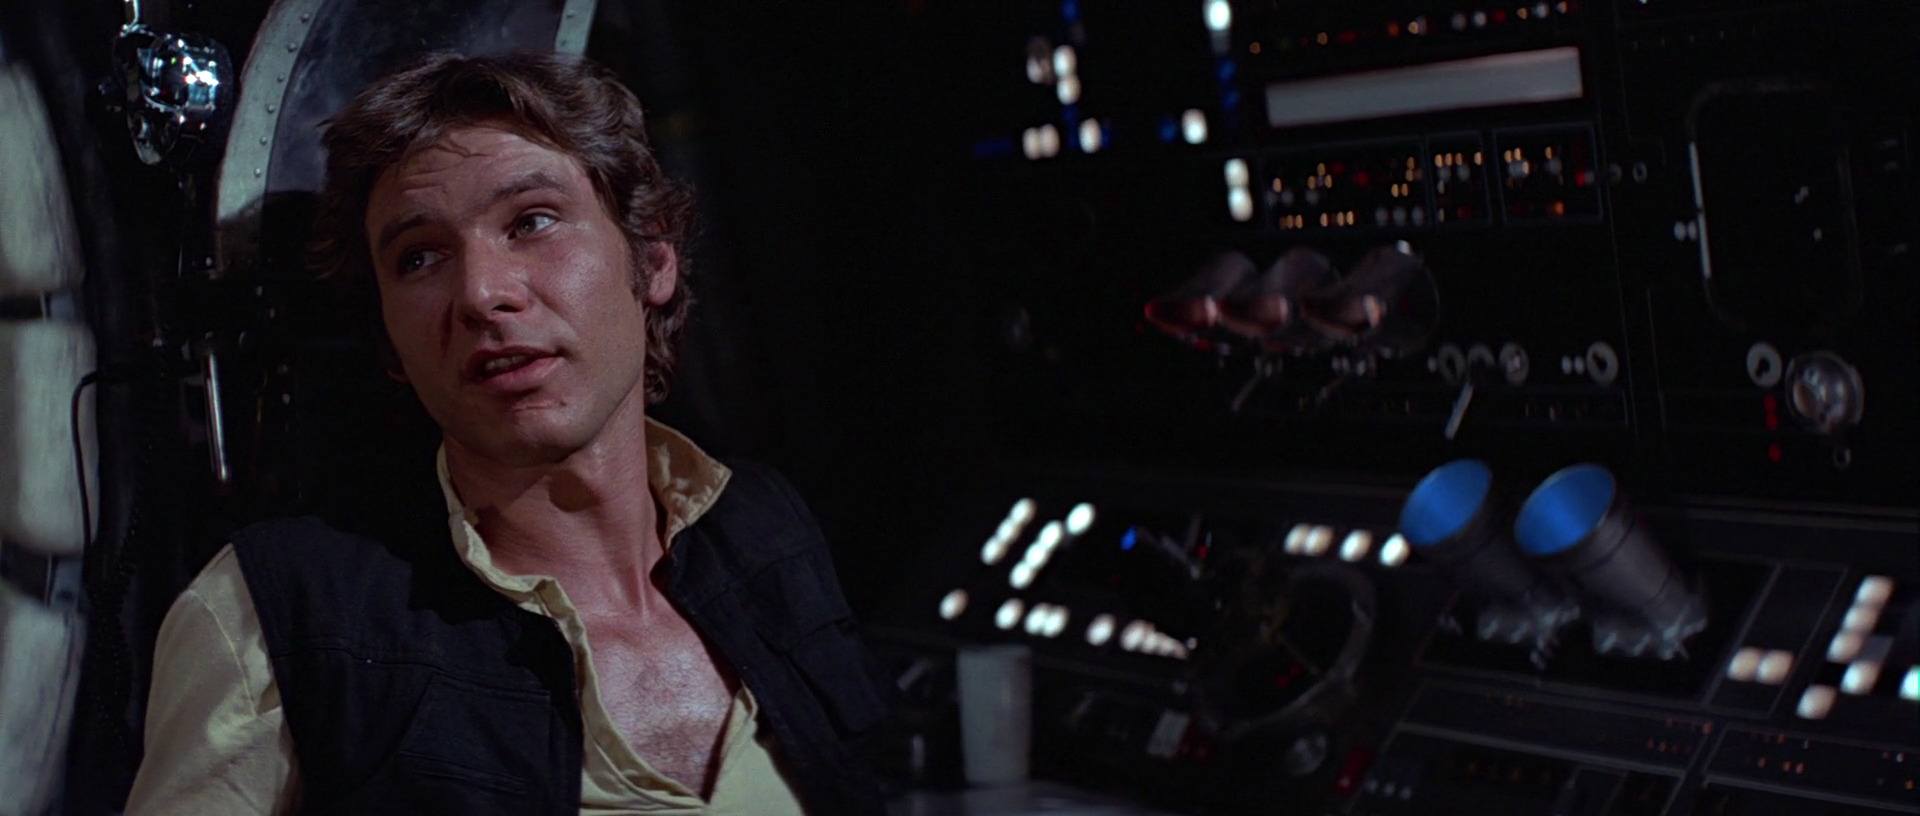 Han Solo sitting in a chair with his feet up, looking to the left of the frame and speaking